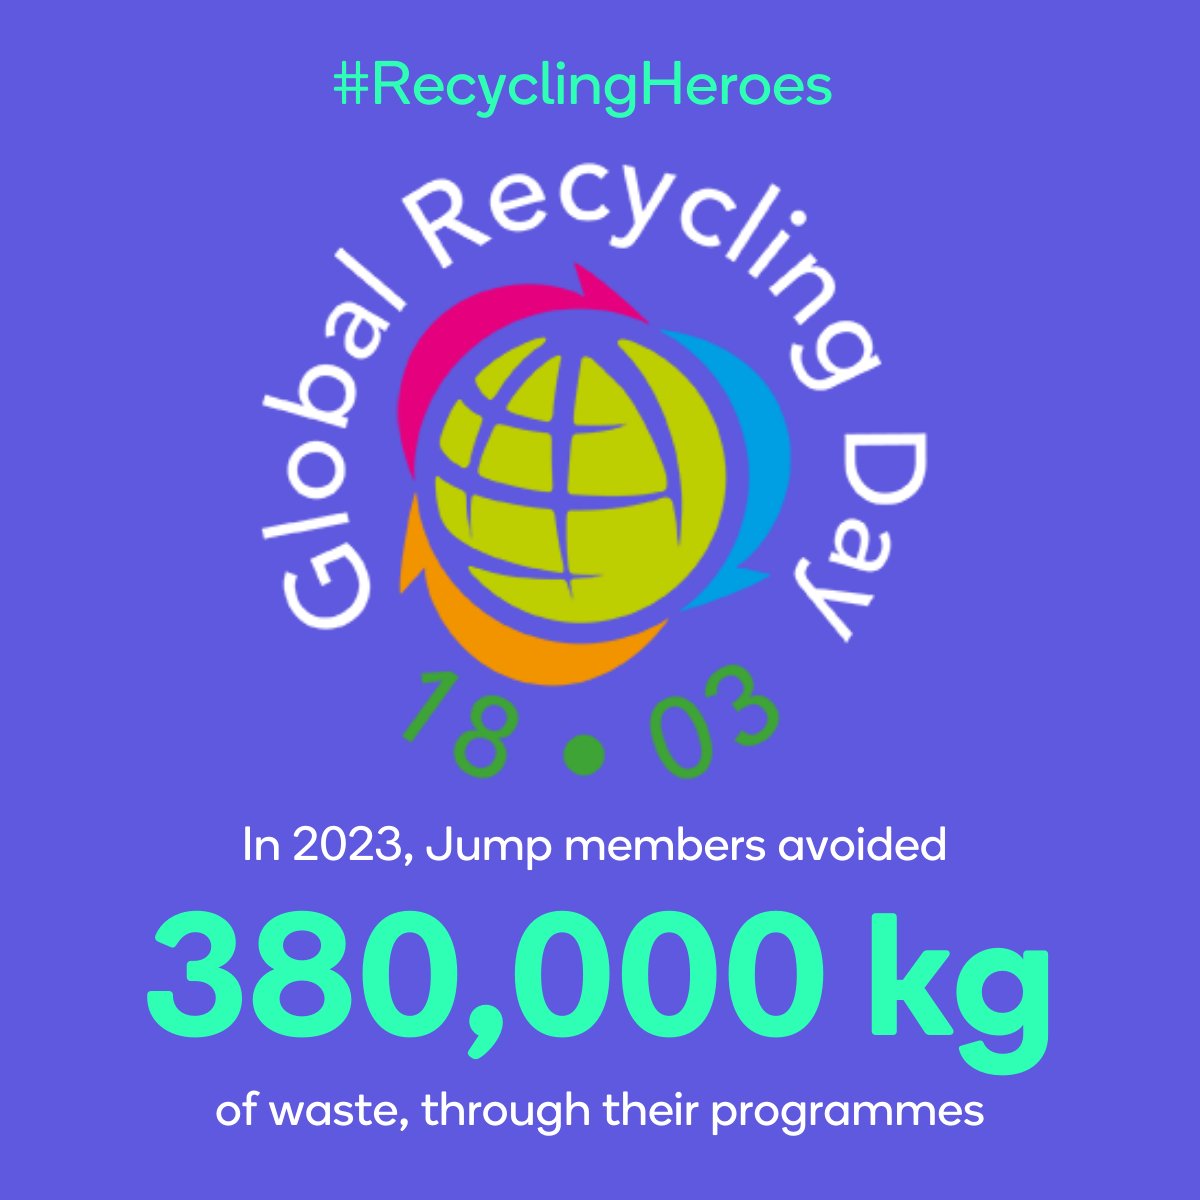 For @GlbRecyclingDay we're celebrating our #RecyclingHeroes who avoided over 380,000 kg of waste in 2023 through reducing, re-using and recycling. You can see more about how Jump programmes delivered real impact in 2023, by reading our report: teamjump.co.uk/the-impact-of-…